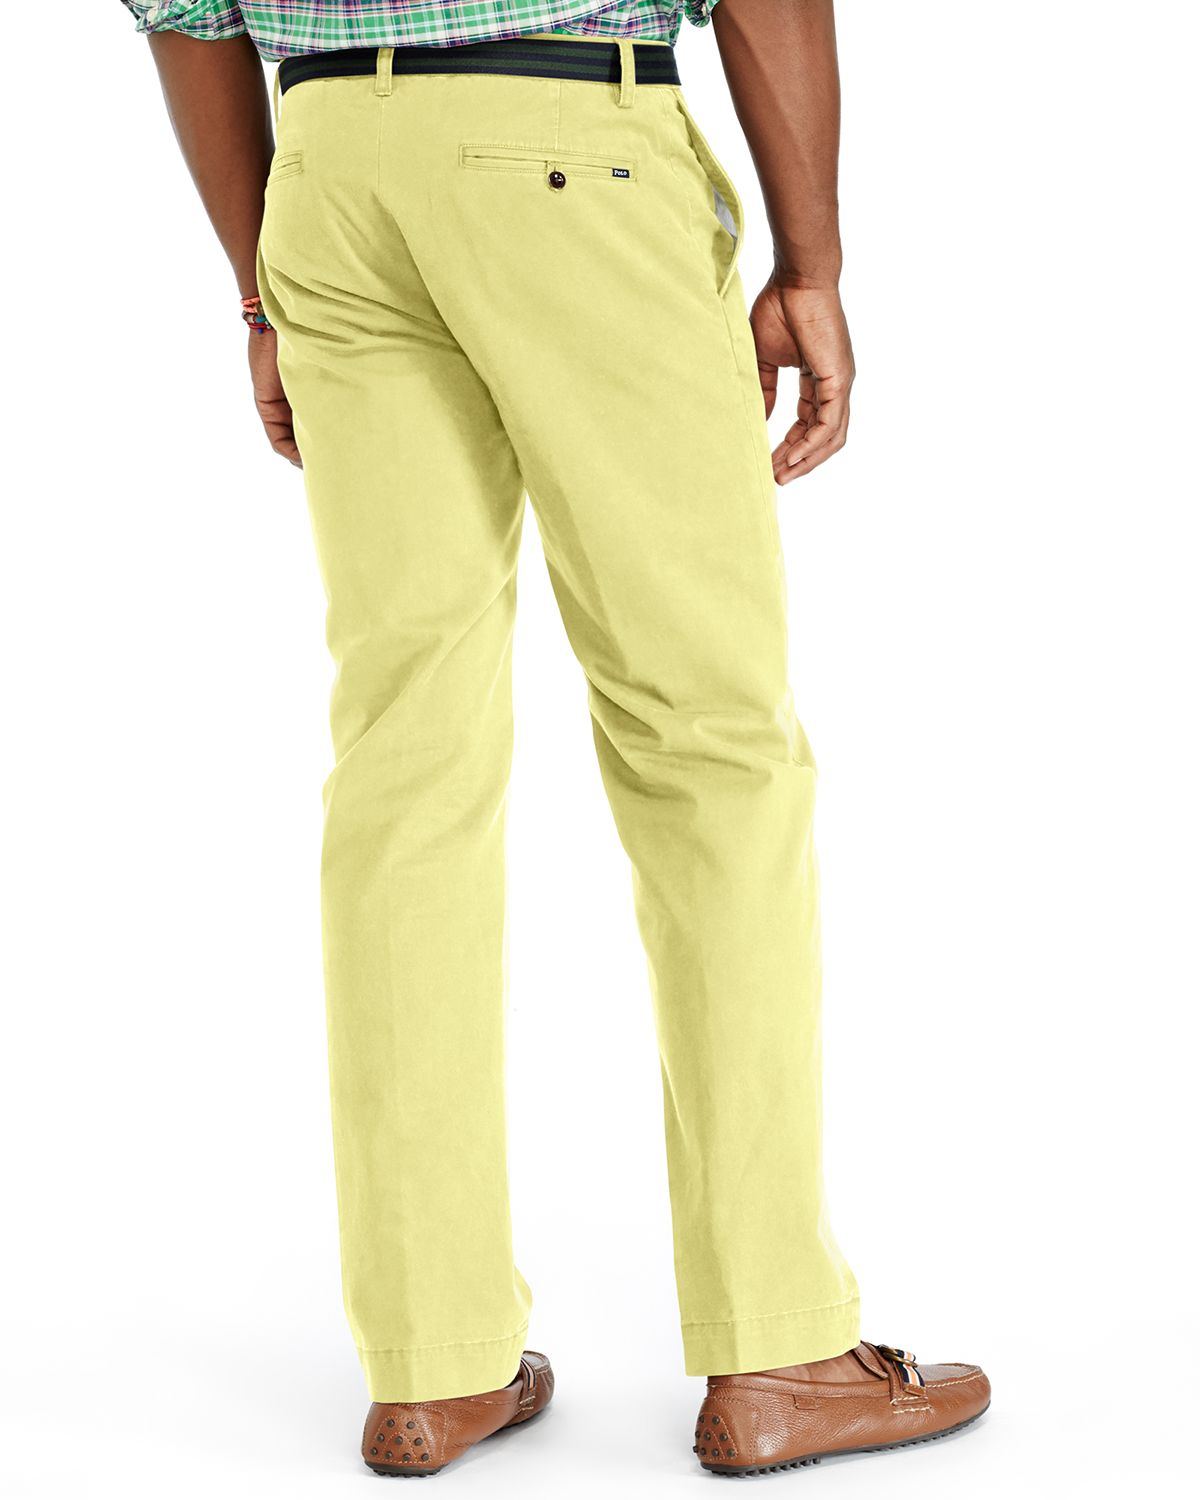 Lyst - Ralph Lauren Polo Classic-Fit Lightweight Chino Pants in Yellow ...